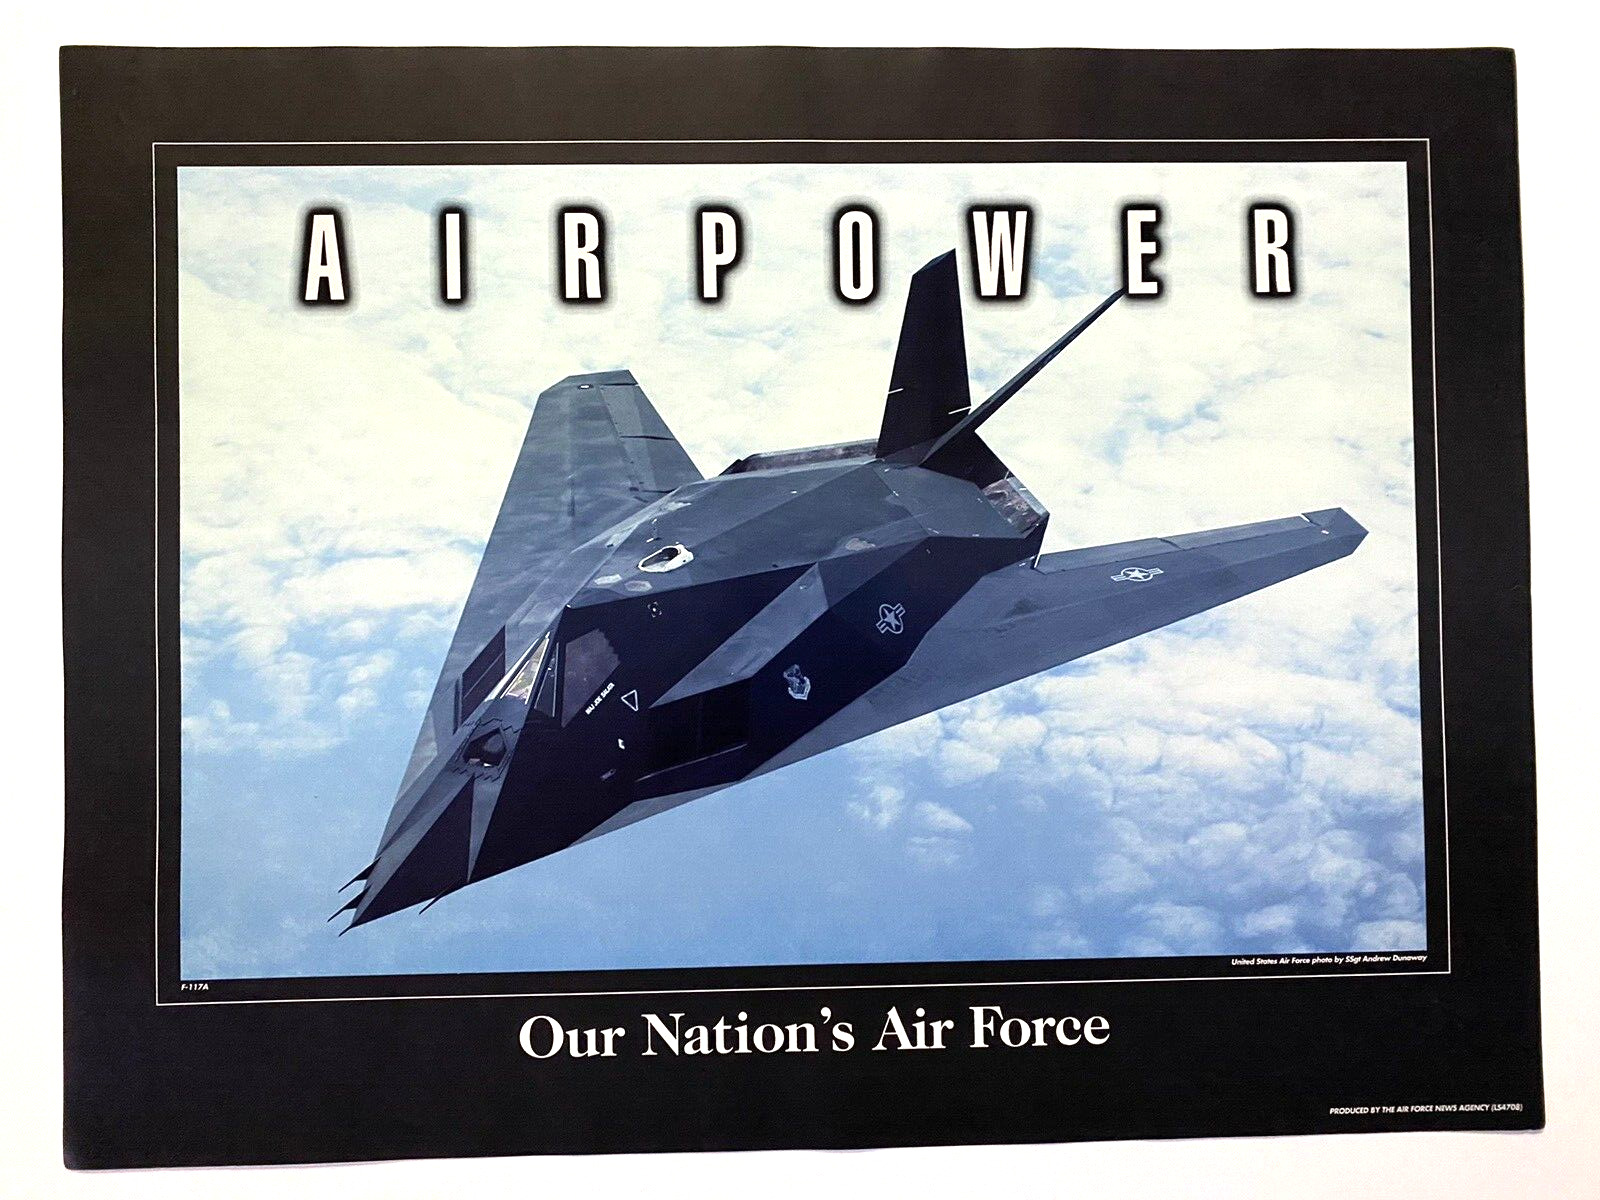 Vintage Air Force Air Power Poster F-117 Nighthawk Stealth Fighter 18x24 RARE